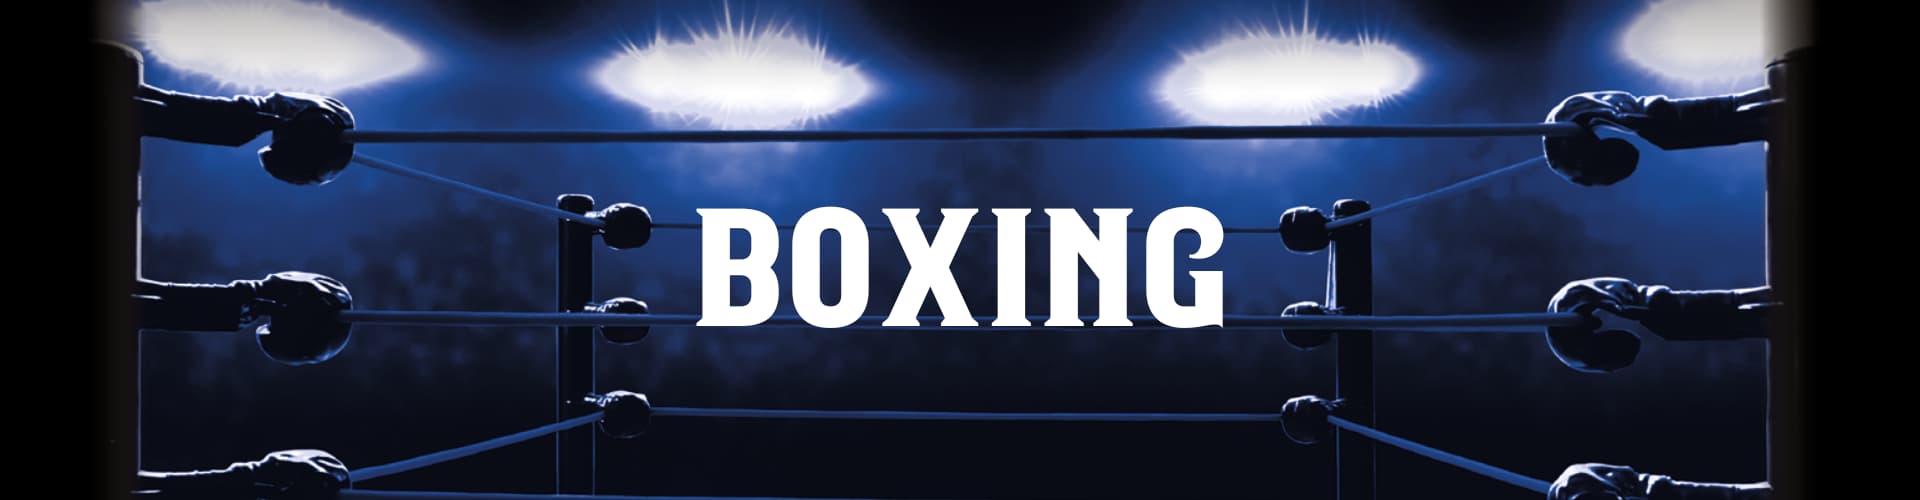 Watch Live Boxing in Cheadle Hulme at The King's Tap Pub